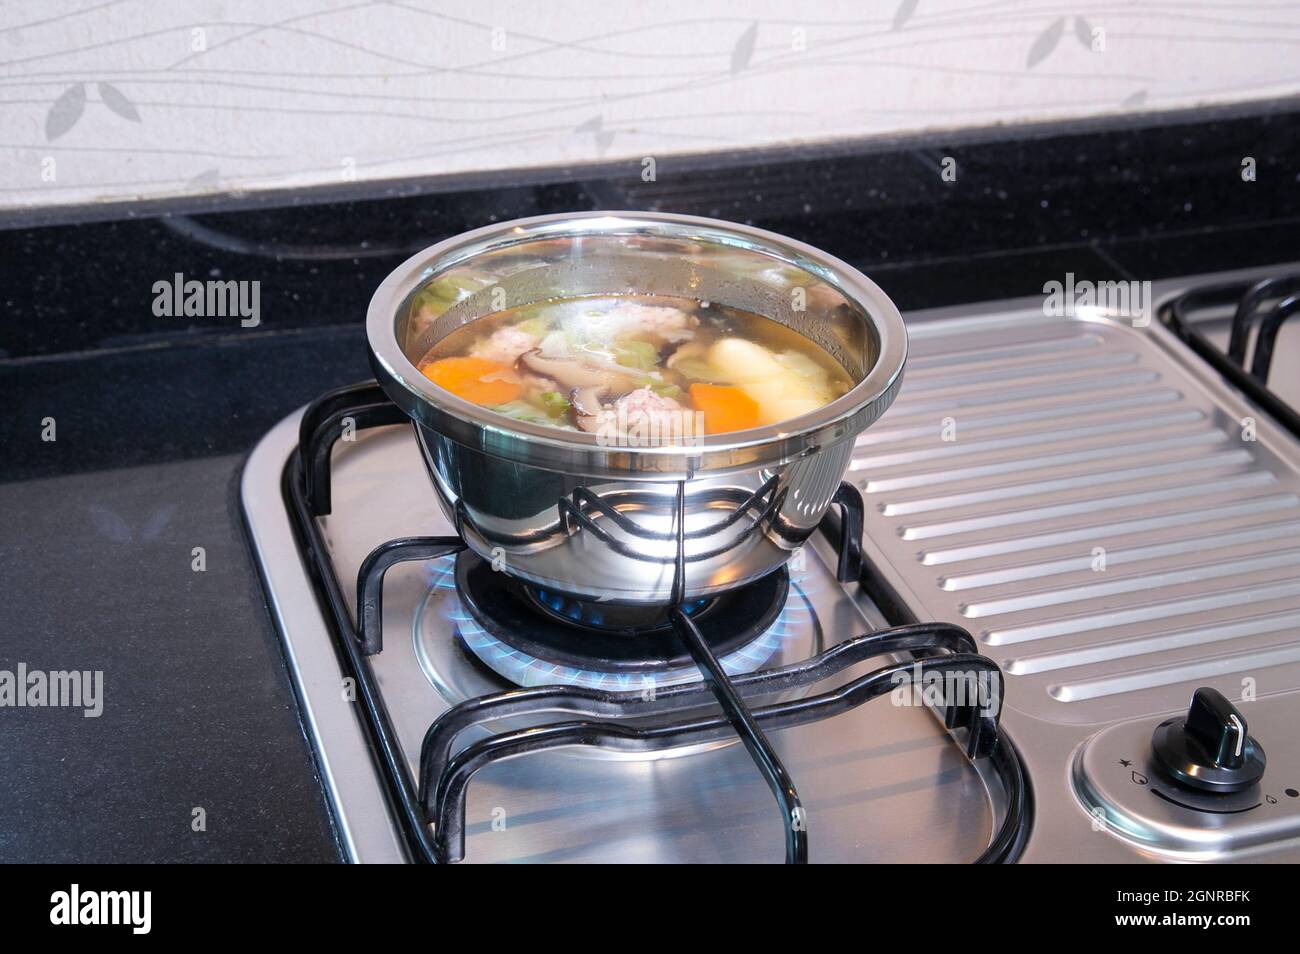 Stainless steel pan with soup on the gas burner stove in the kitchen Stock Photo